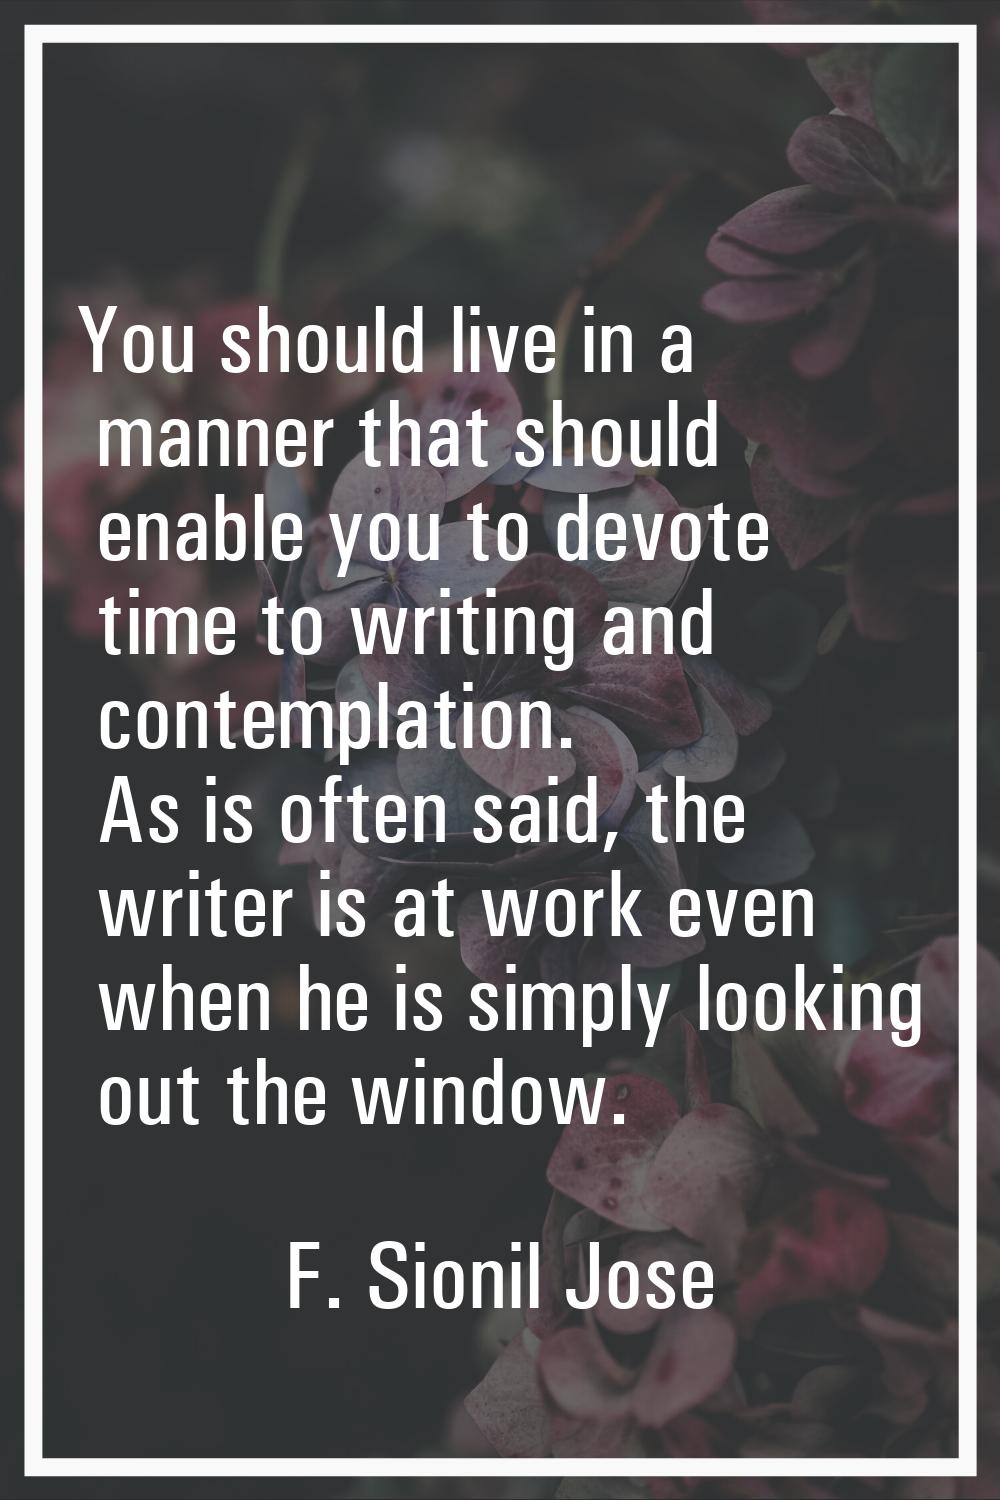 You should live in a manner that should enable you to devote time to writing and contemplation. As 